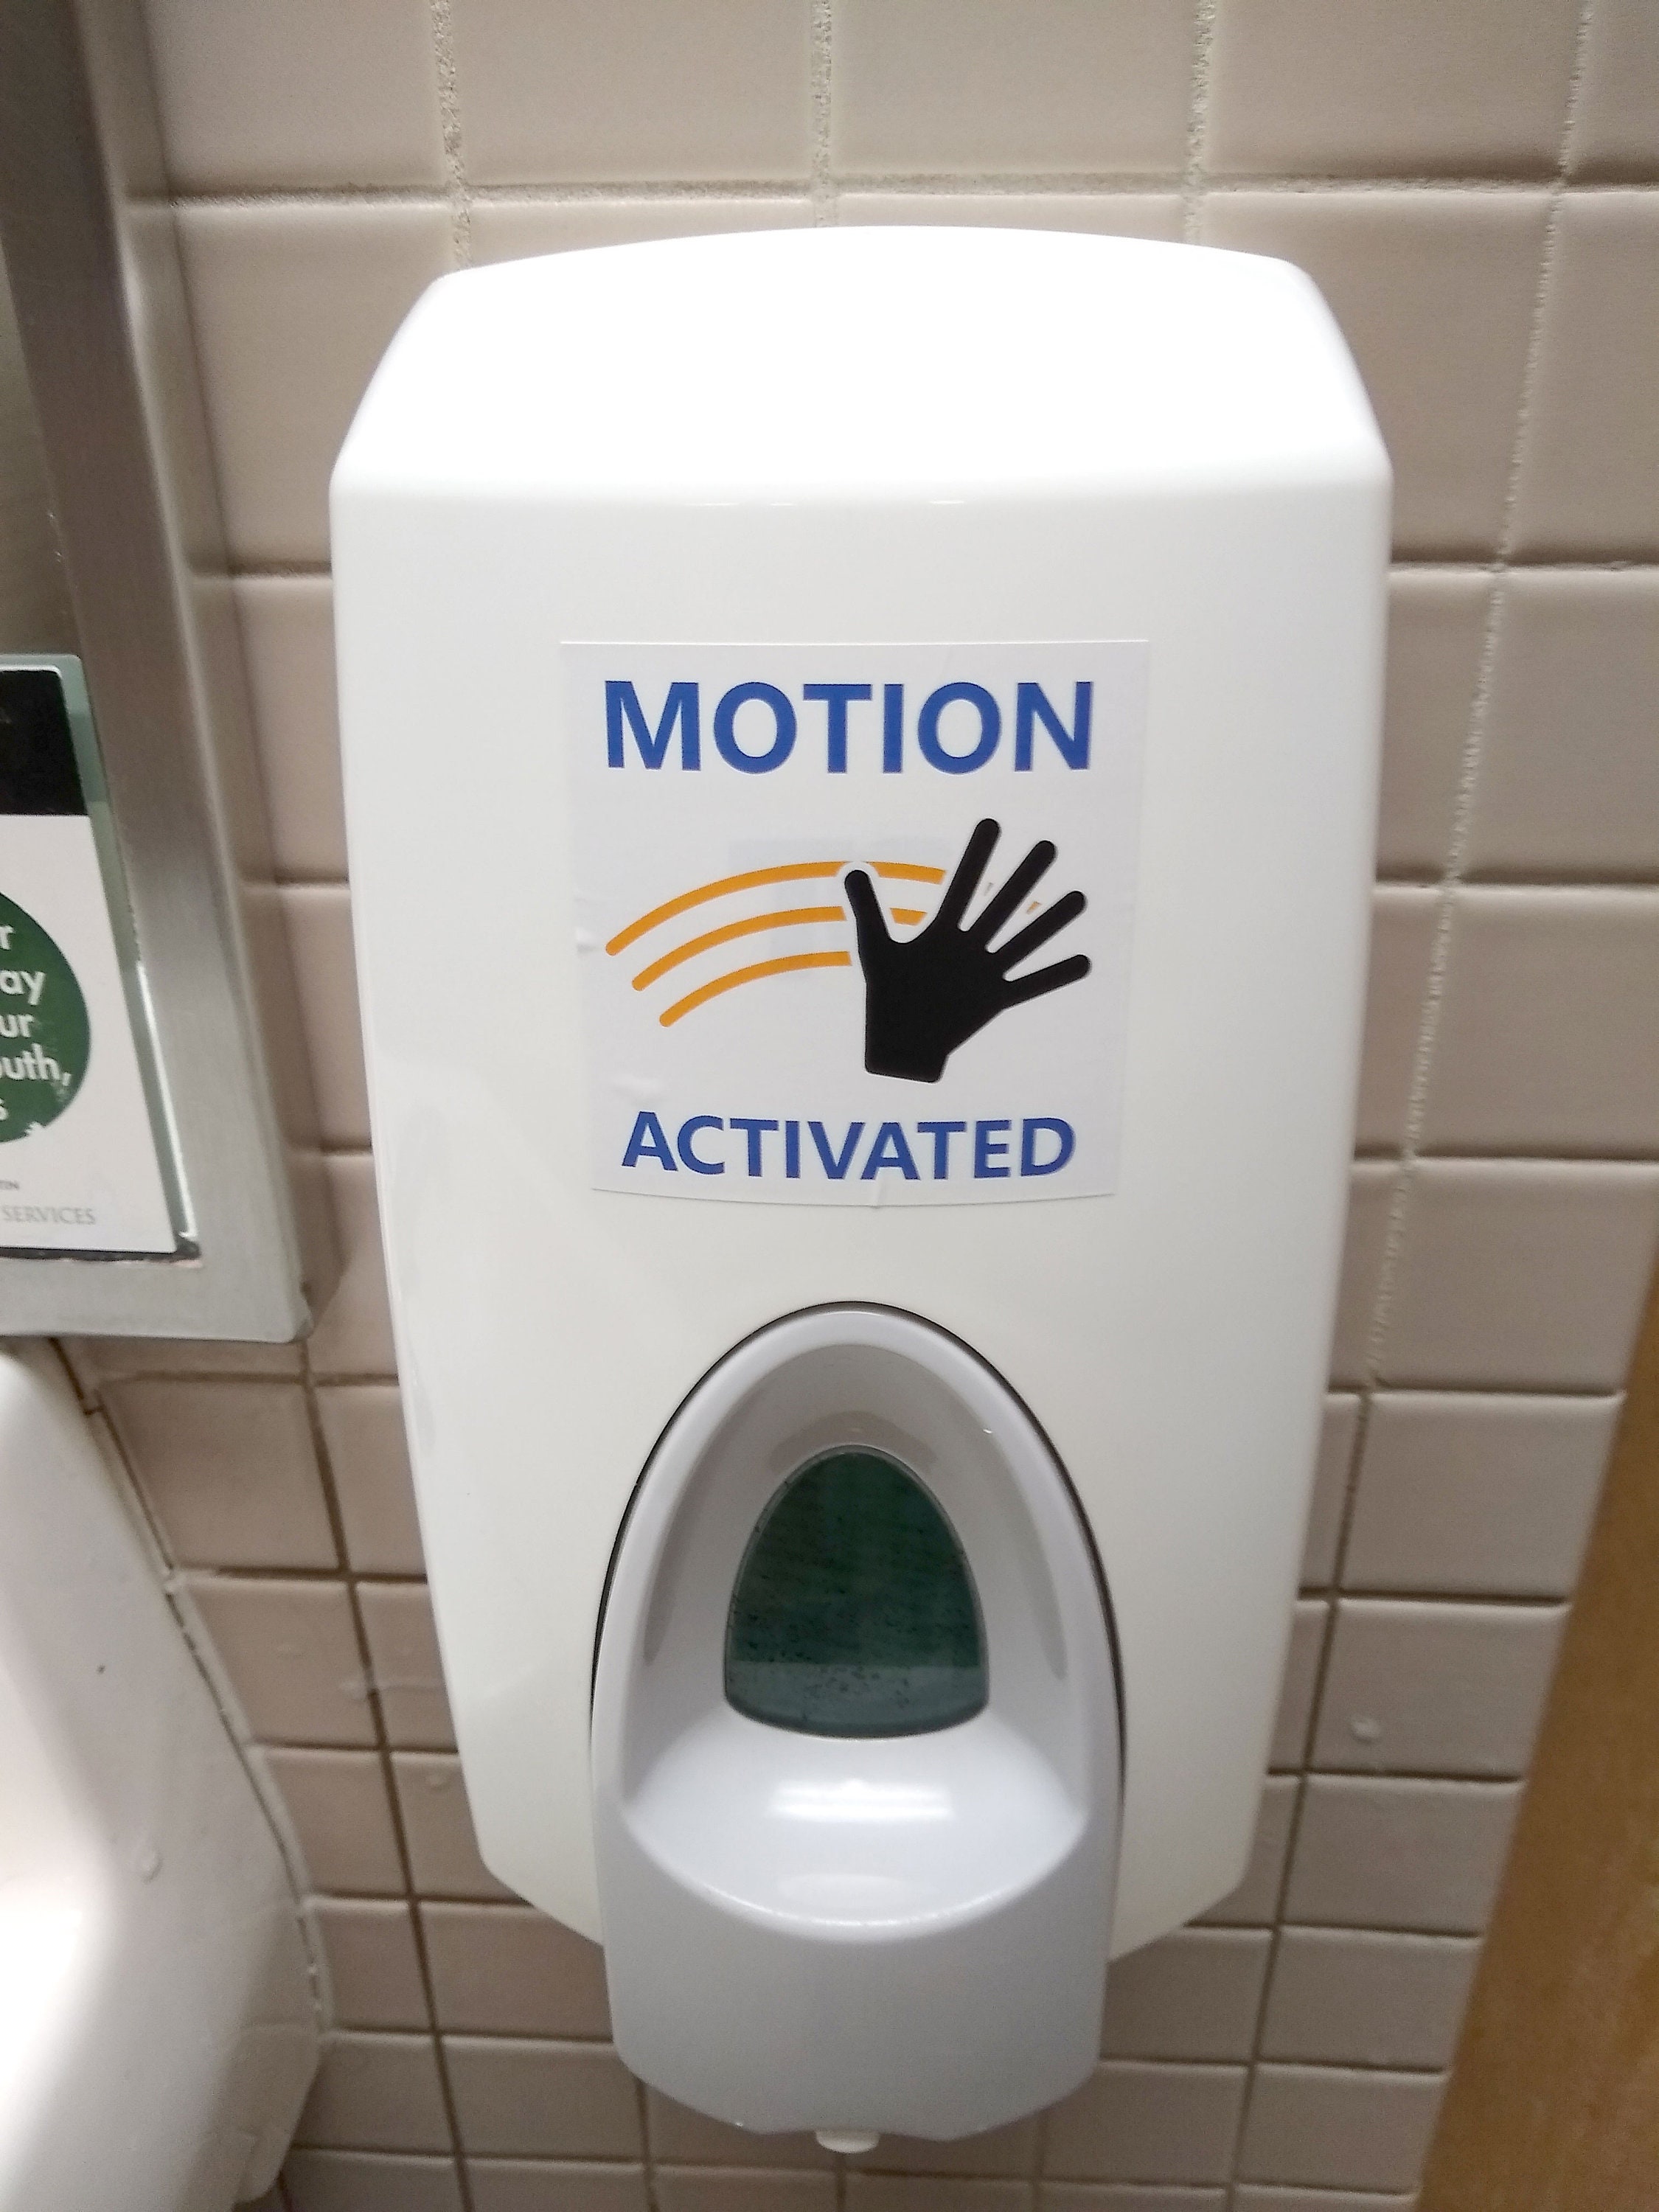 Voice Motion & Clap Activated Prank Stickers 60 Pack,Make Your Friends Publicly Yell & Vigorously Jazz Hand at Vending Machines & Doors.Funny Gag